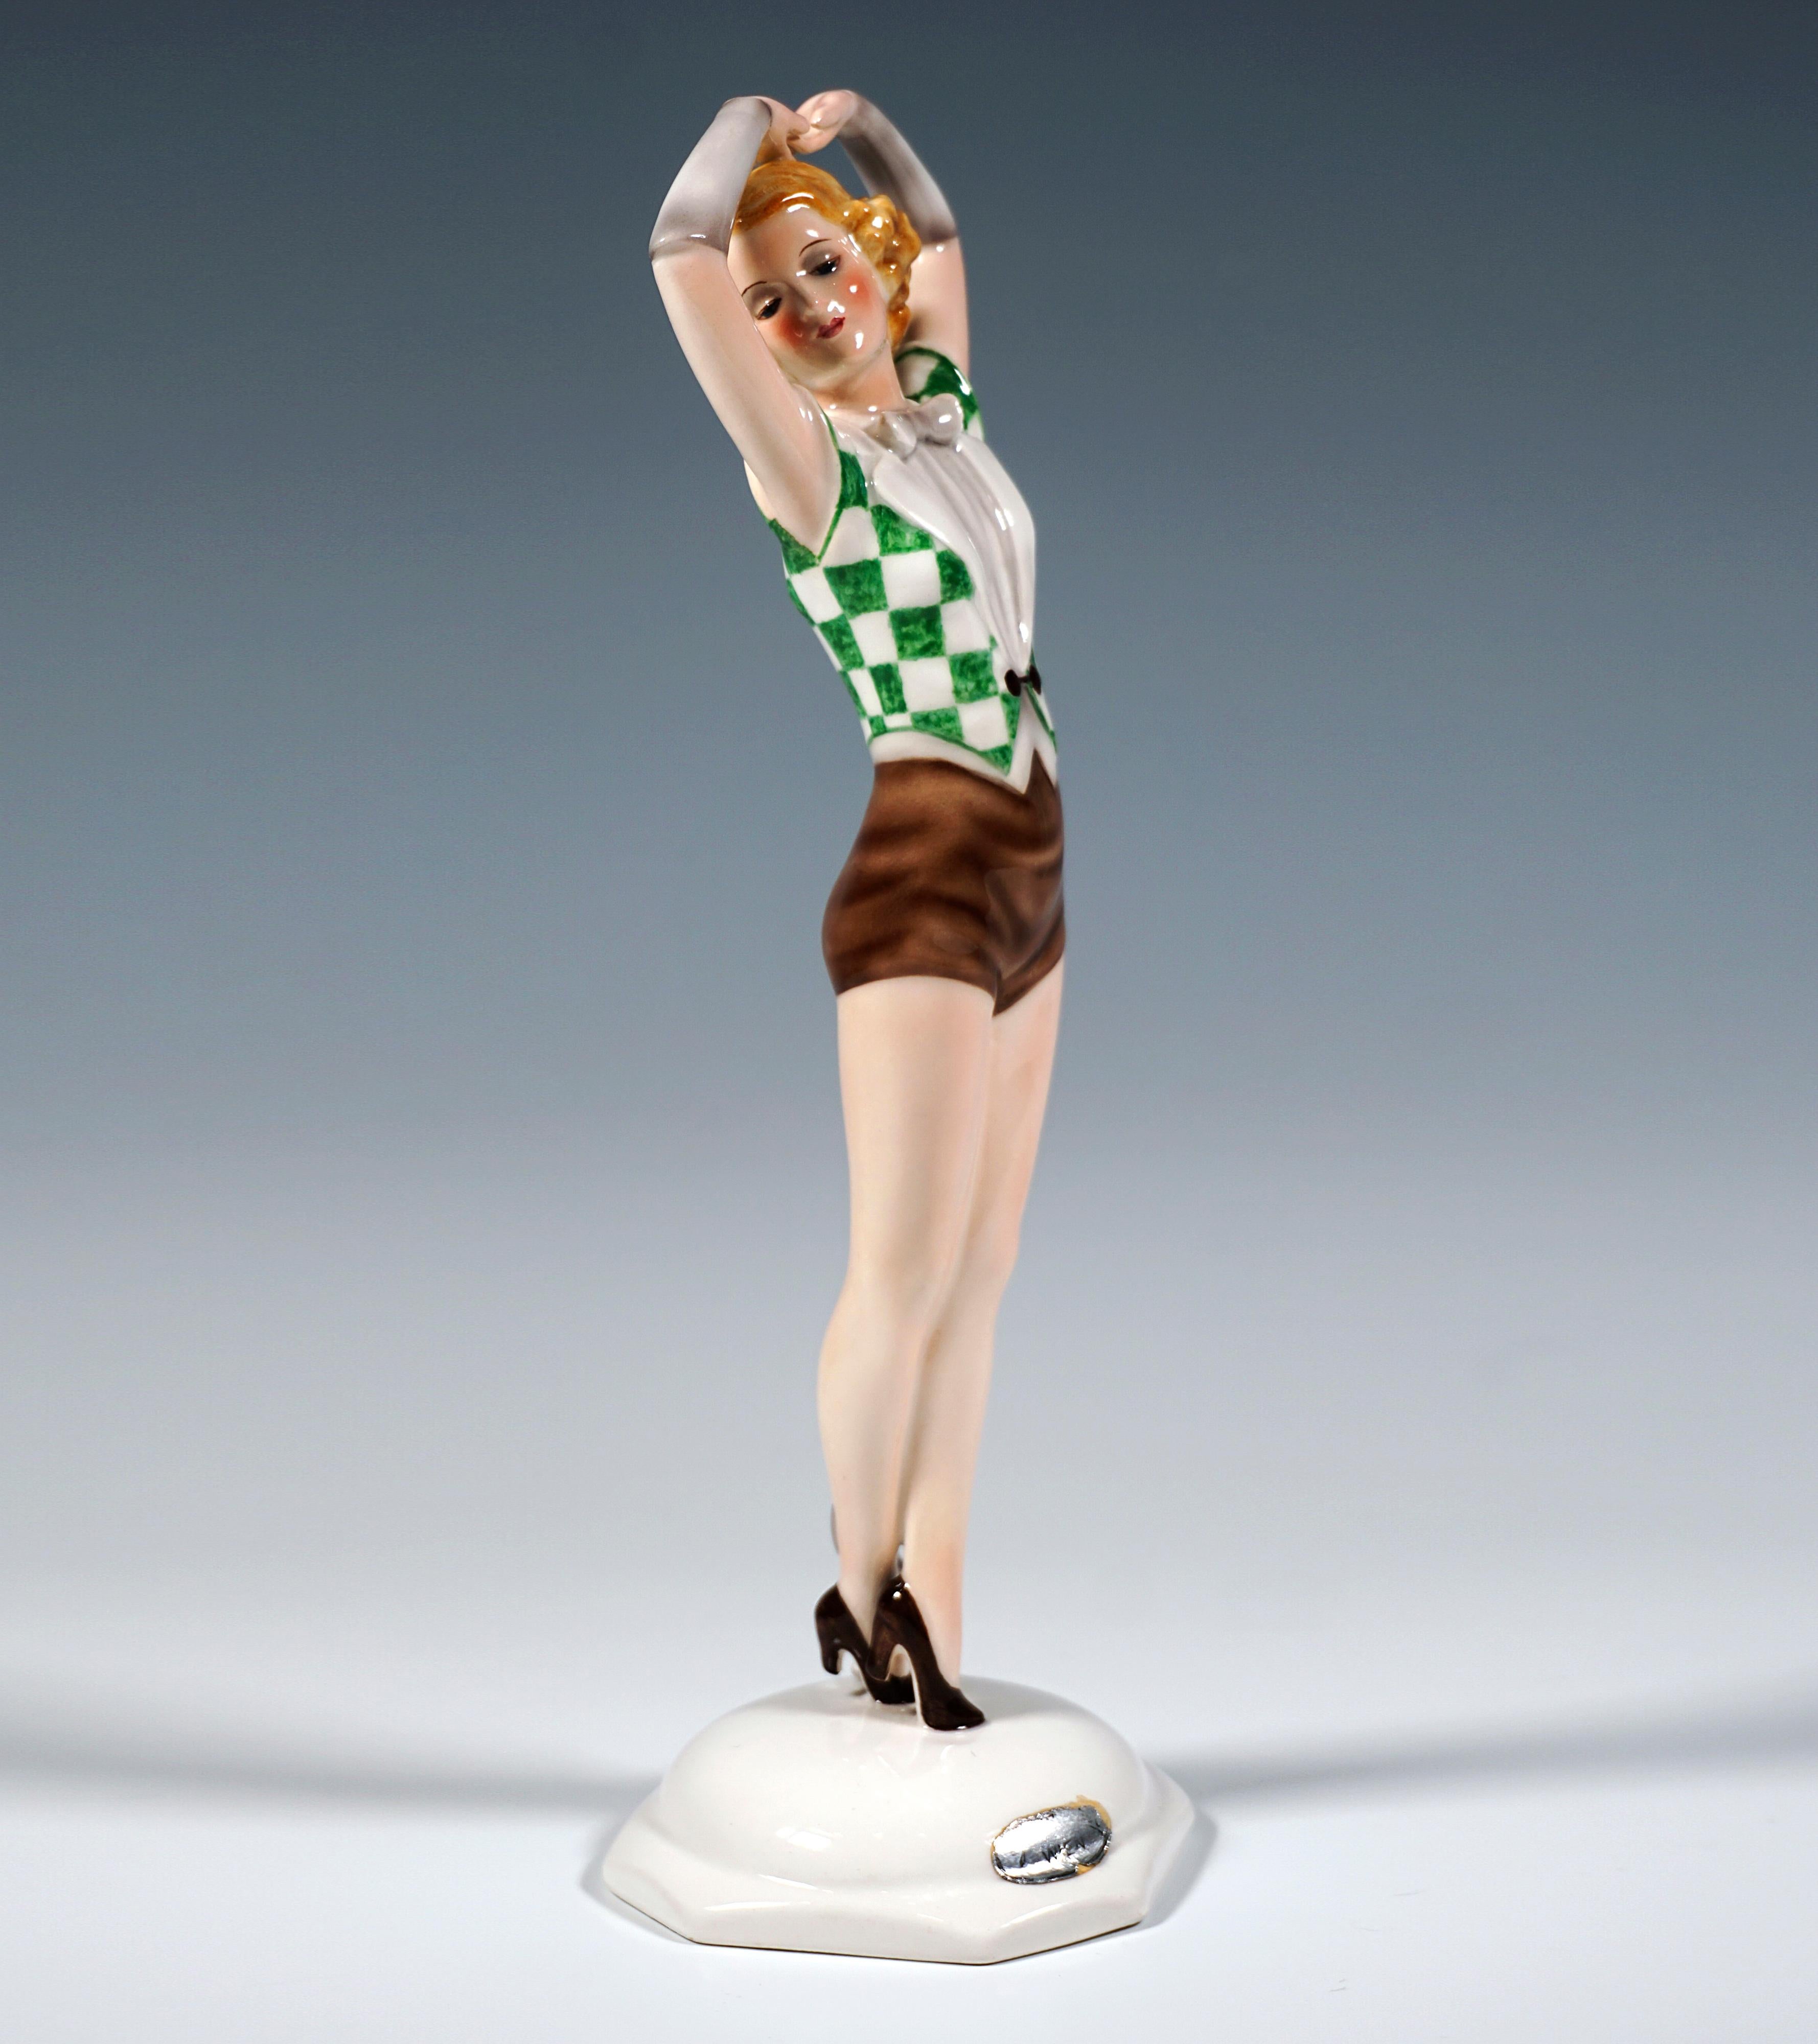 Very Rare and exceptional Goldscheider Vienna Ceramic Figurine of the 1930s:
A young dancer with chin-length, curly, blond hair standing on the tips of her heels, wearing short brown pants and a green and white checked sleeveless jacket with